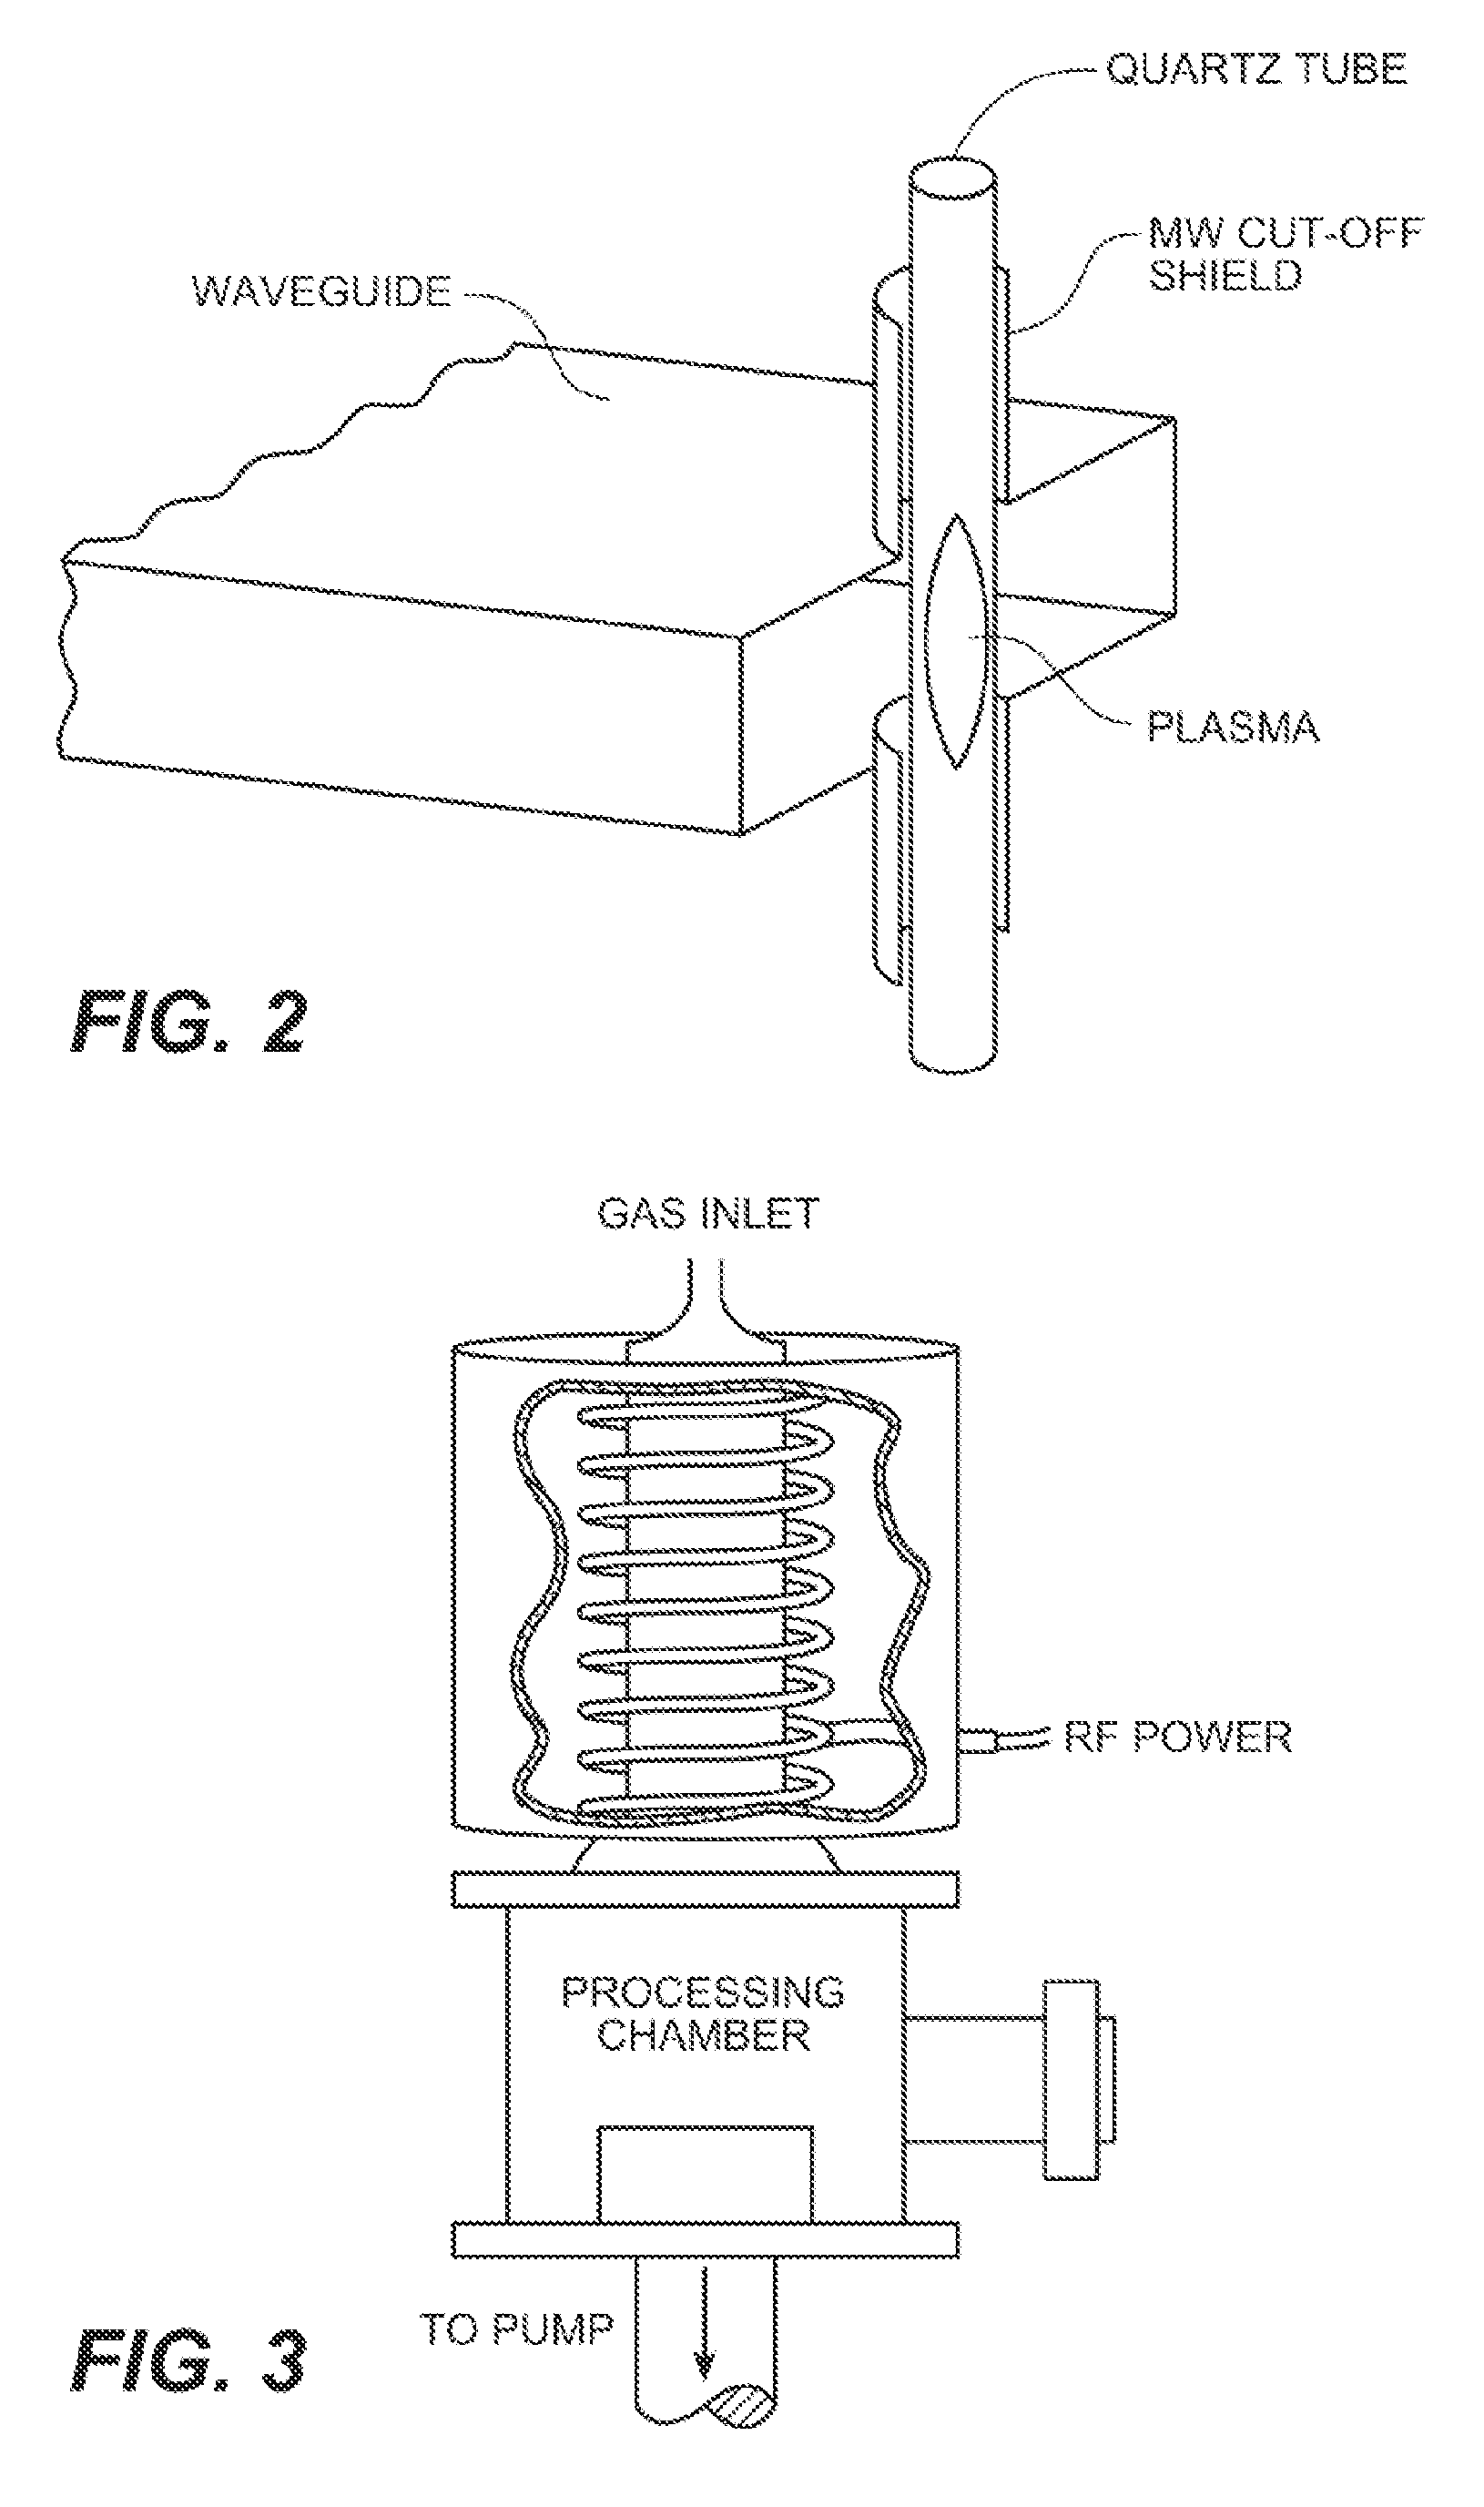 Method for generating hydrogen from water or steam in a plasma